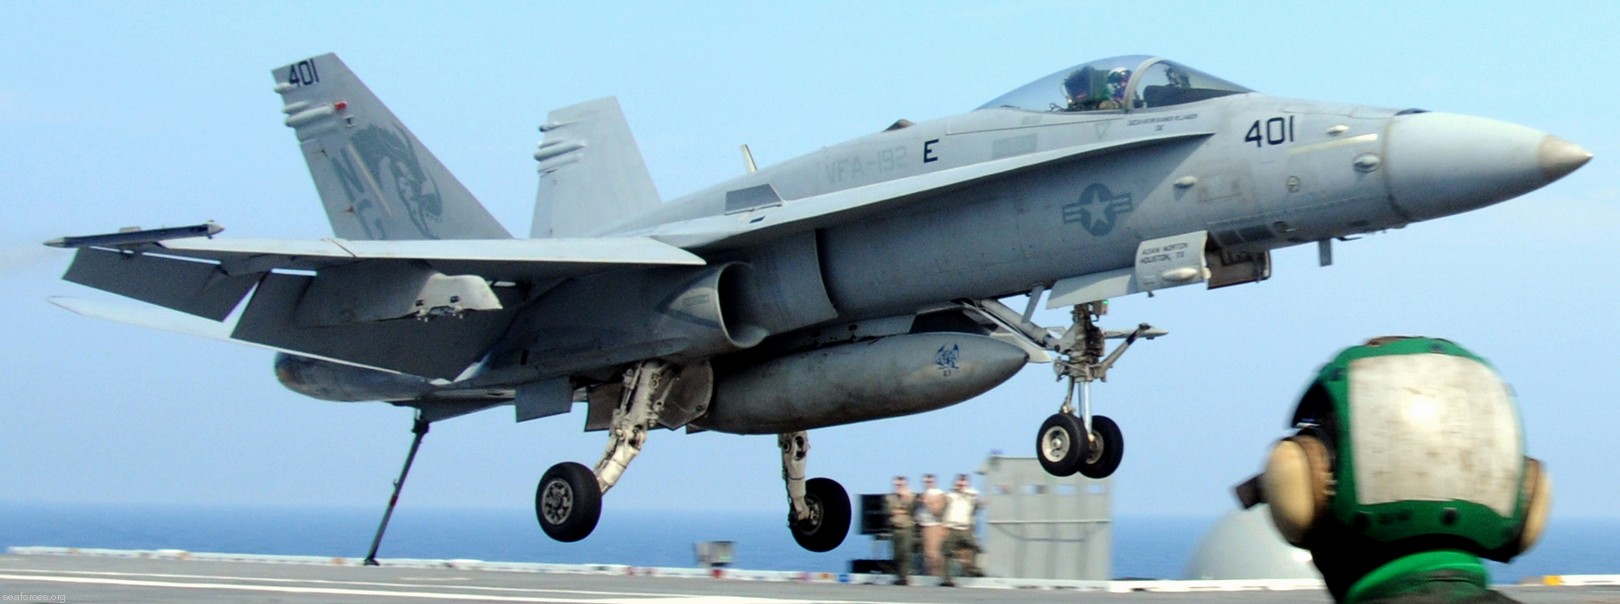 vfa-192 golden dragons strike fighter squadron navy f/a-18c hornet carrier air wing cvw-9 uss george h. w. bush 41 